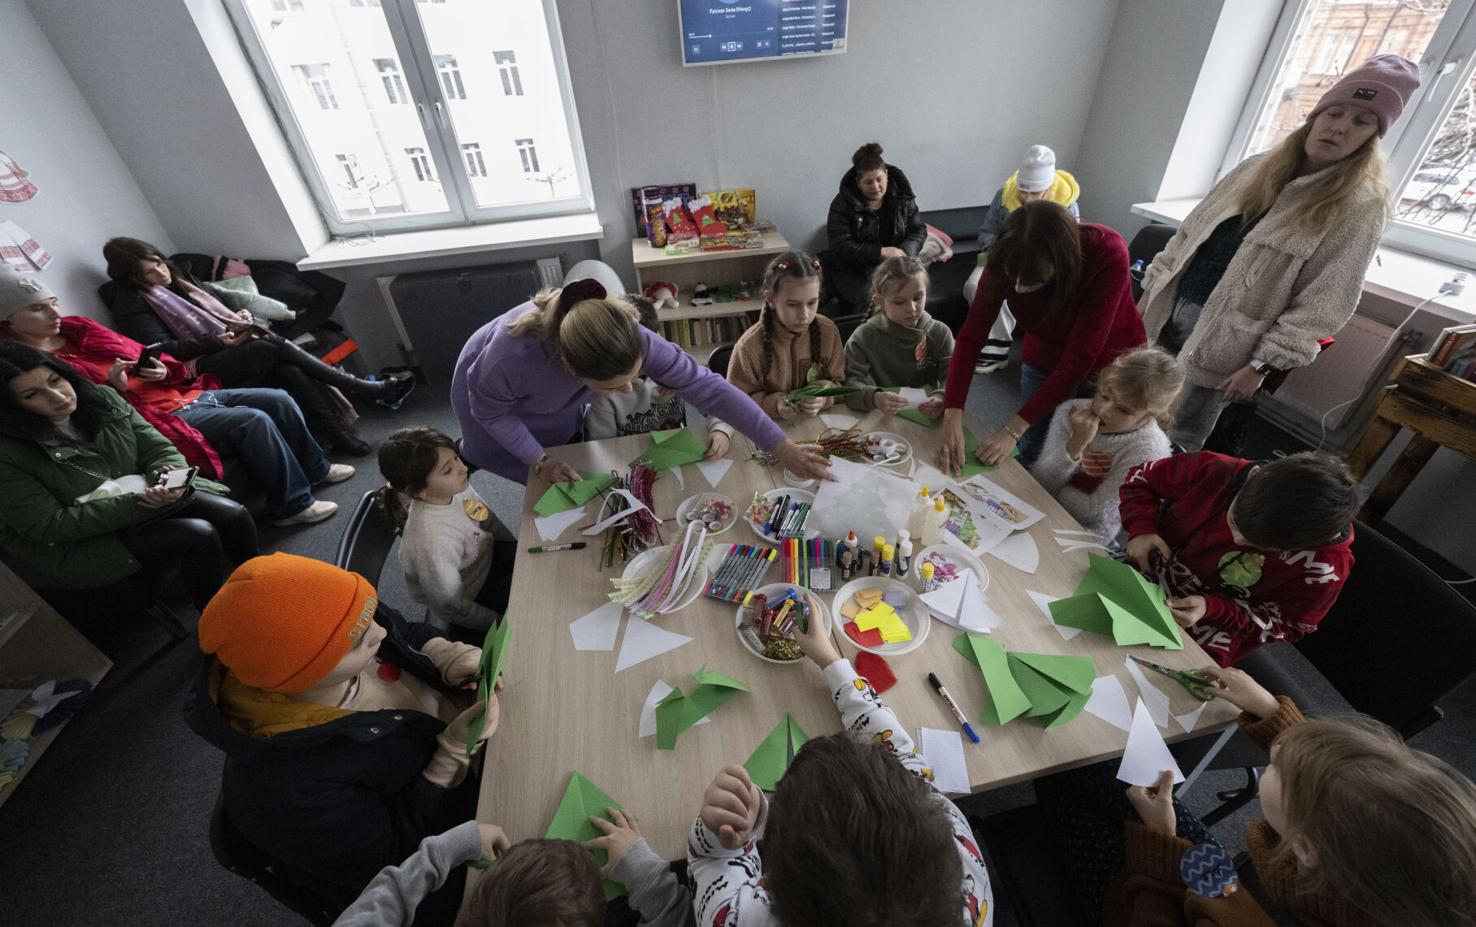 Counselors Diana Veadykina, in purple, and Maryna Starovoitova help refugee children with their Christmas crafts Dec. 11, 2023, at a government hub in Dnipro, Ukraine.